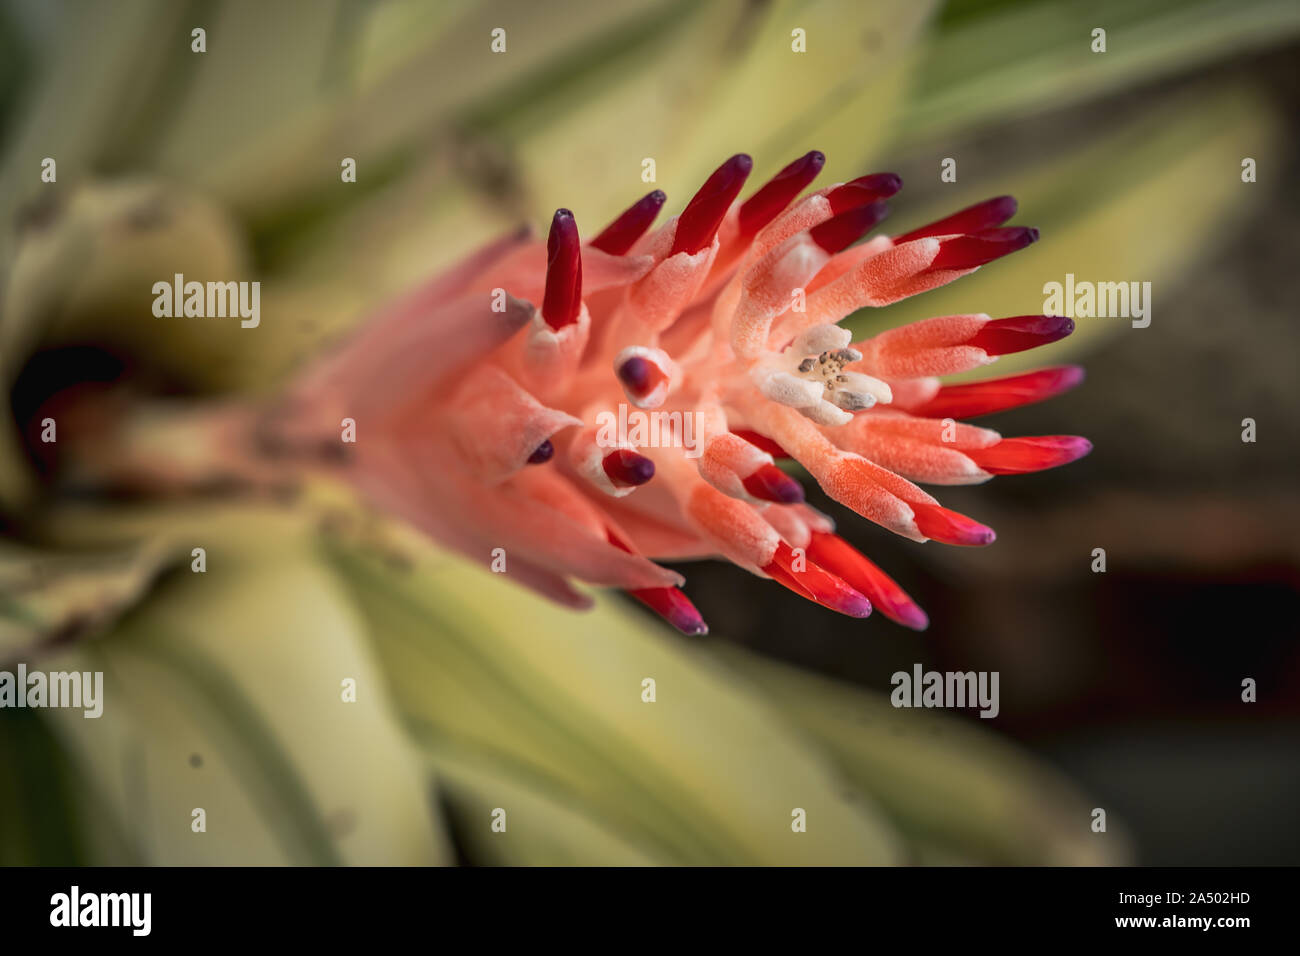 Bromeliaceae, Beautiful colorful flower in the garden Stock Photo